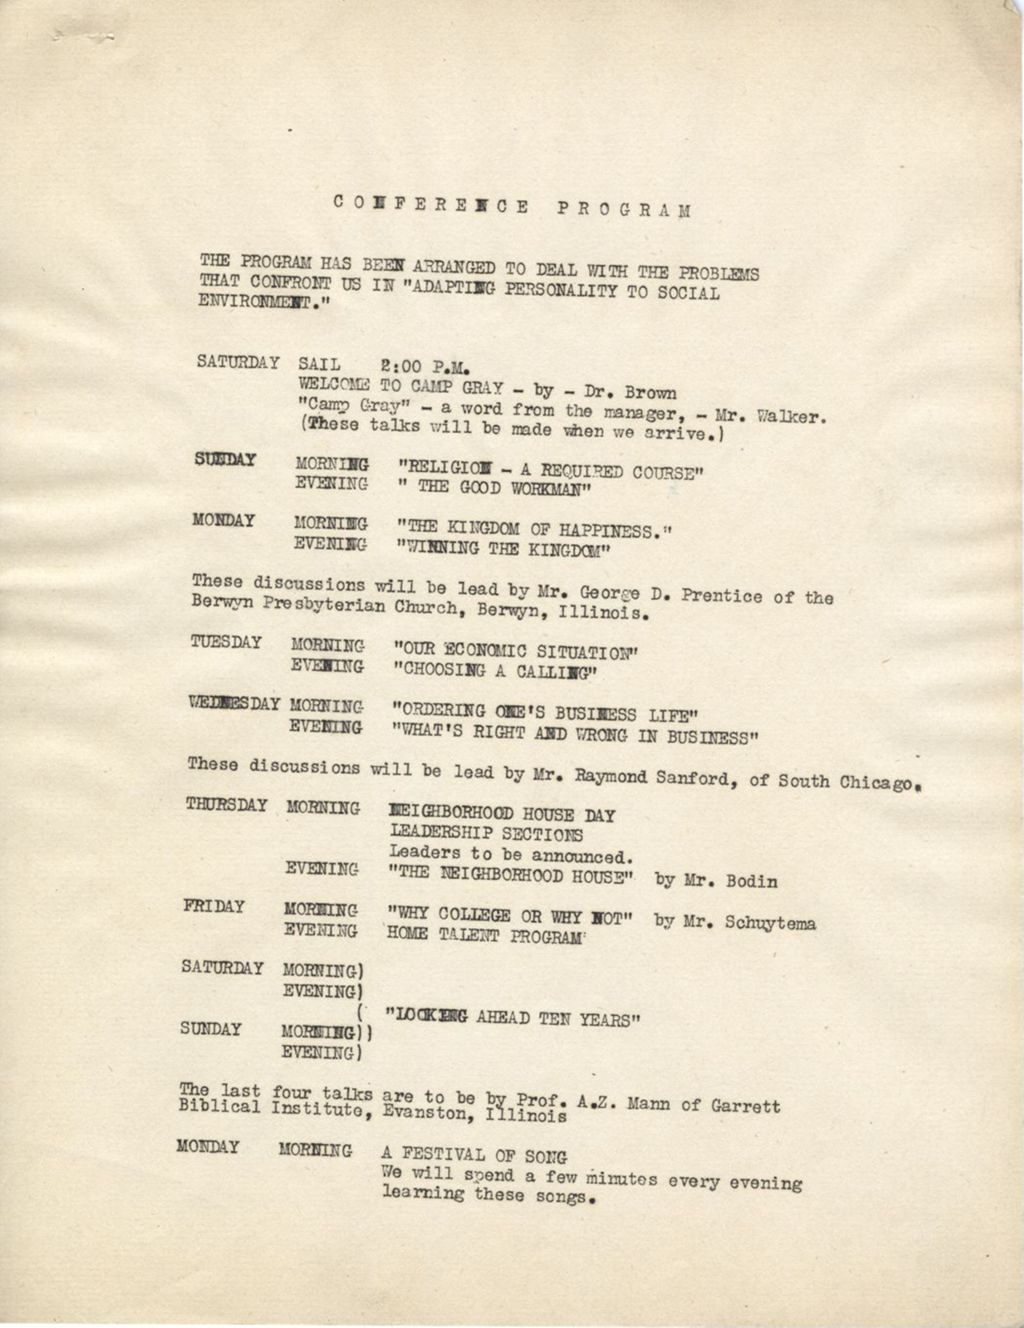 Miniature of Conference program of lectures at Camp Gray, p. 1